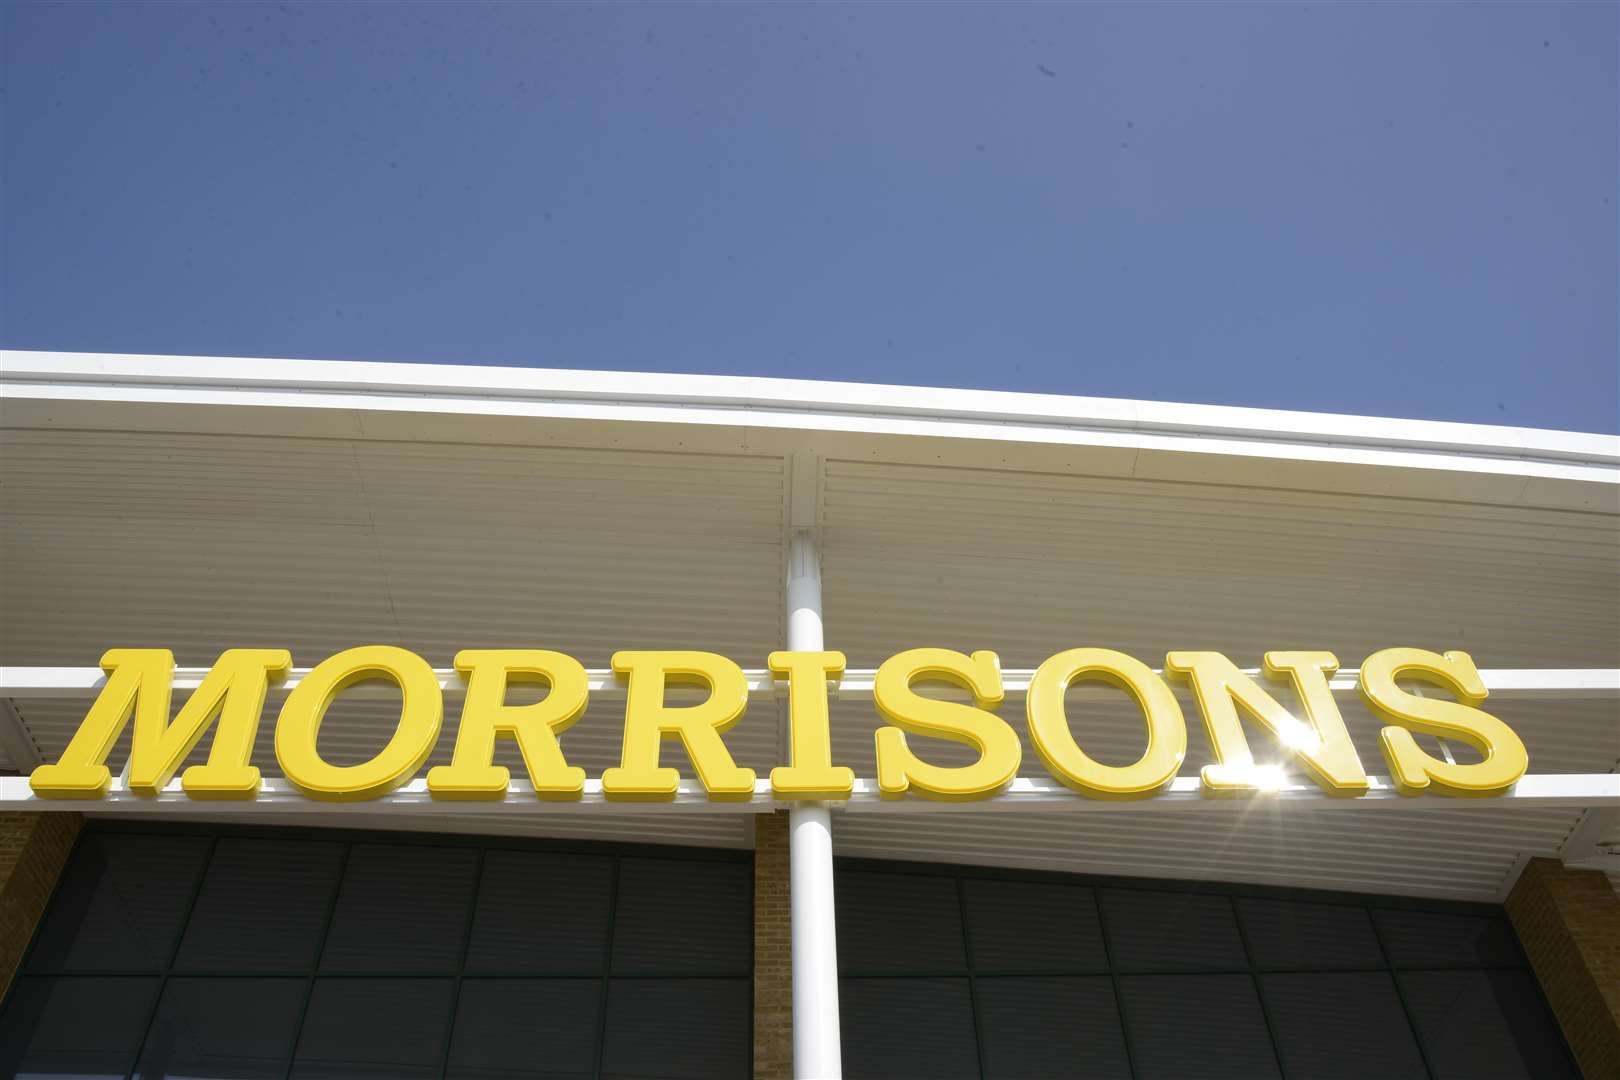 Morrisons has announced cuts to management